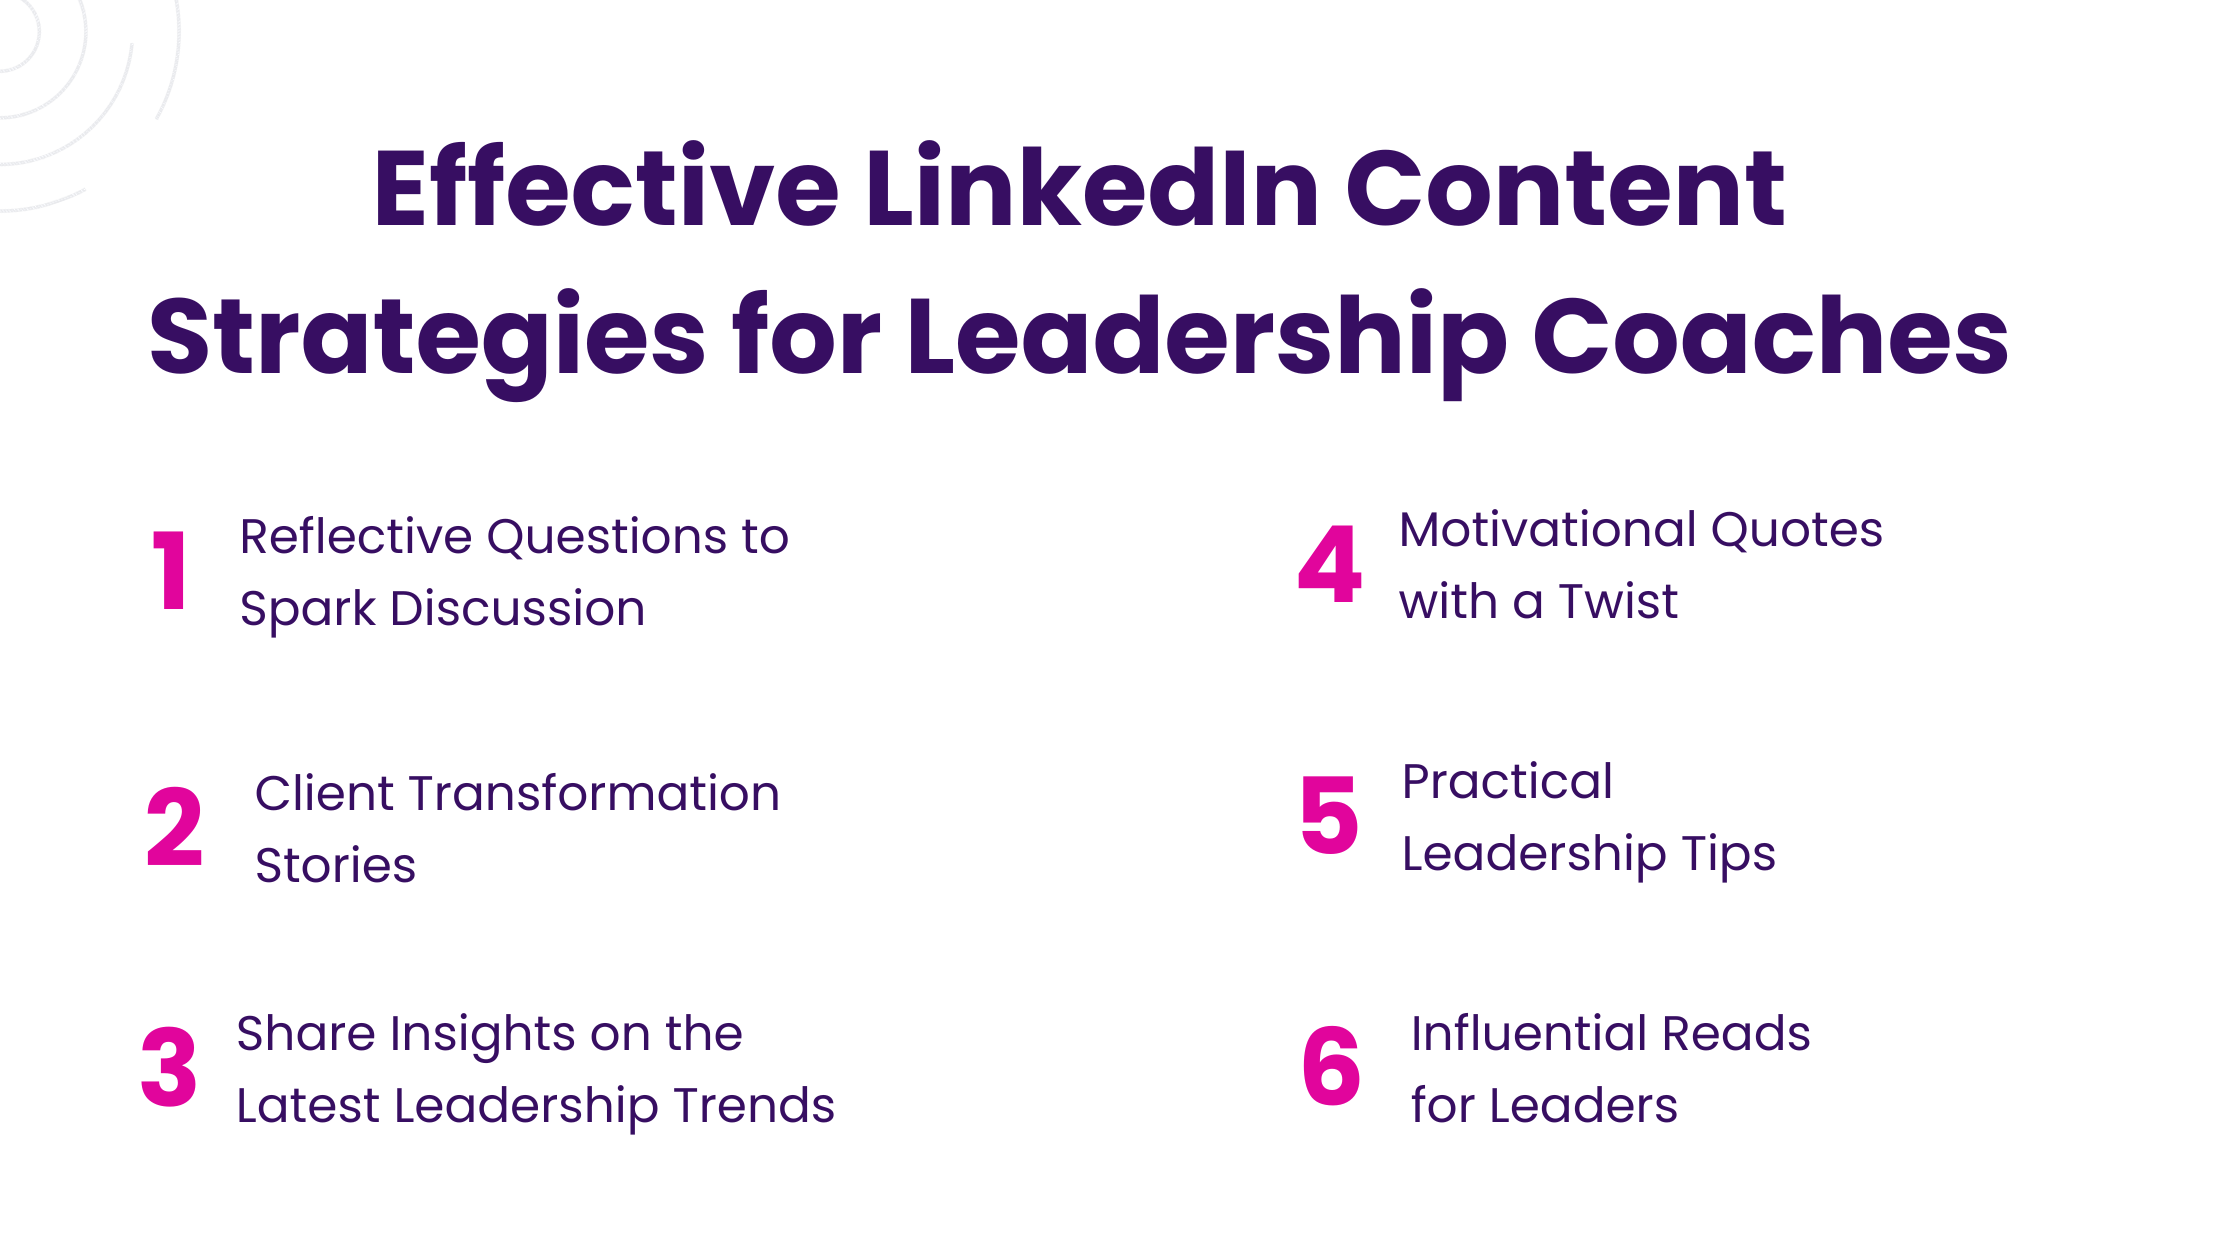 Effective LinkedIn Content Strategies for Leadership Coaches